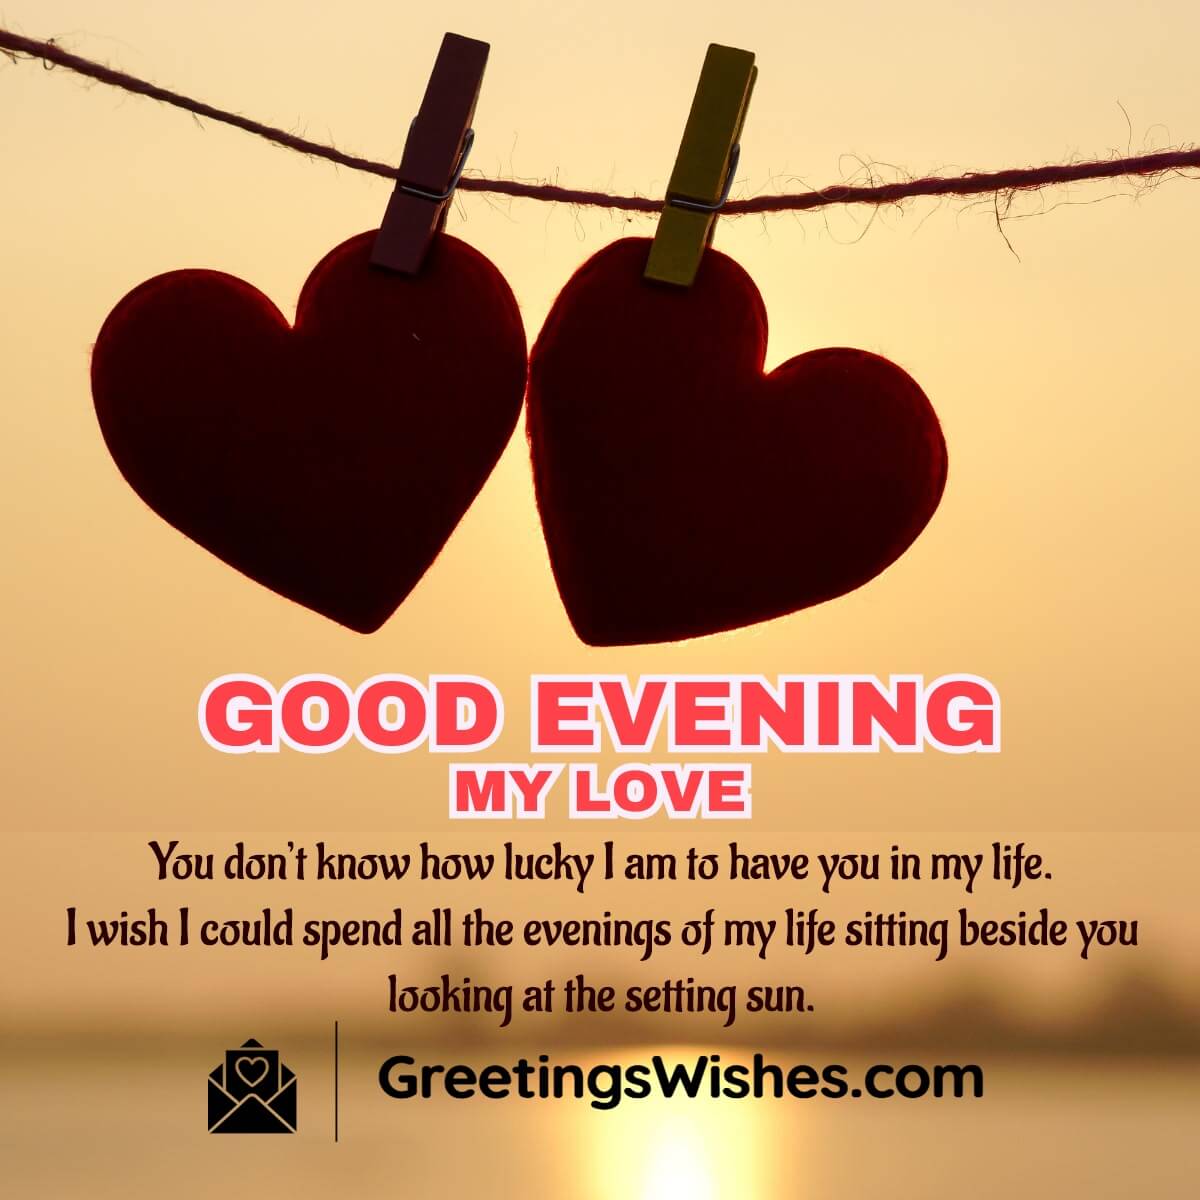 Good Evening Messages for Him